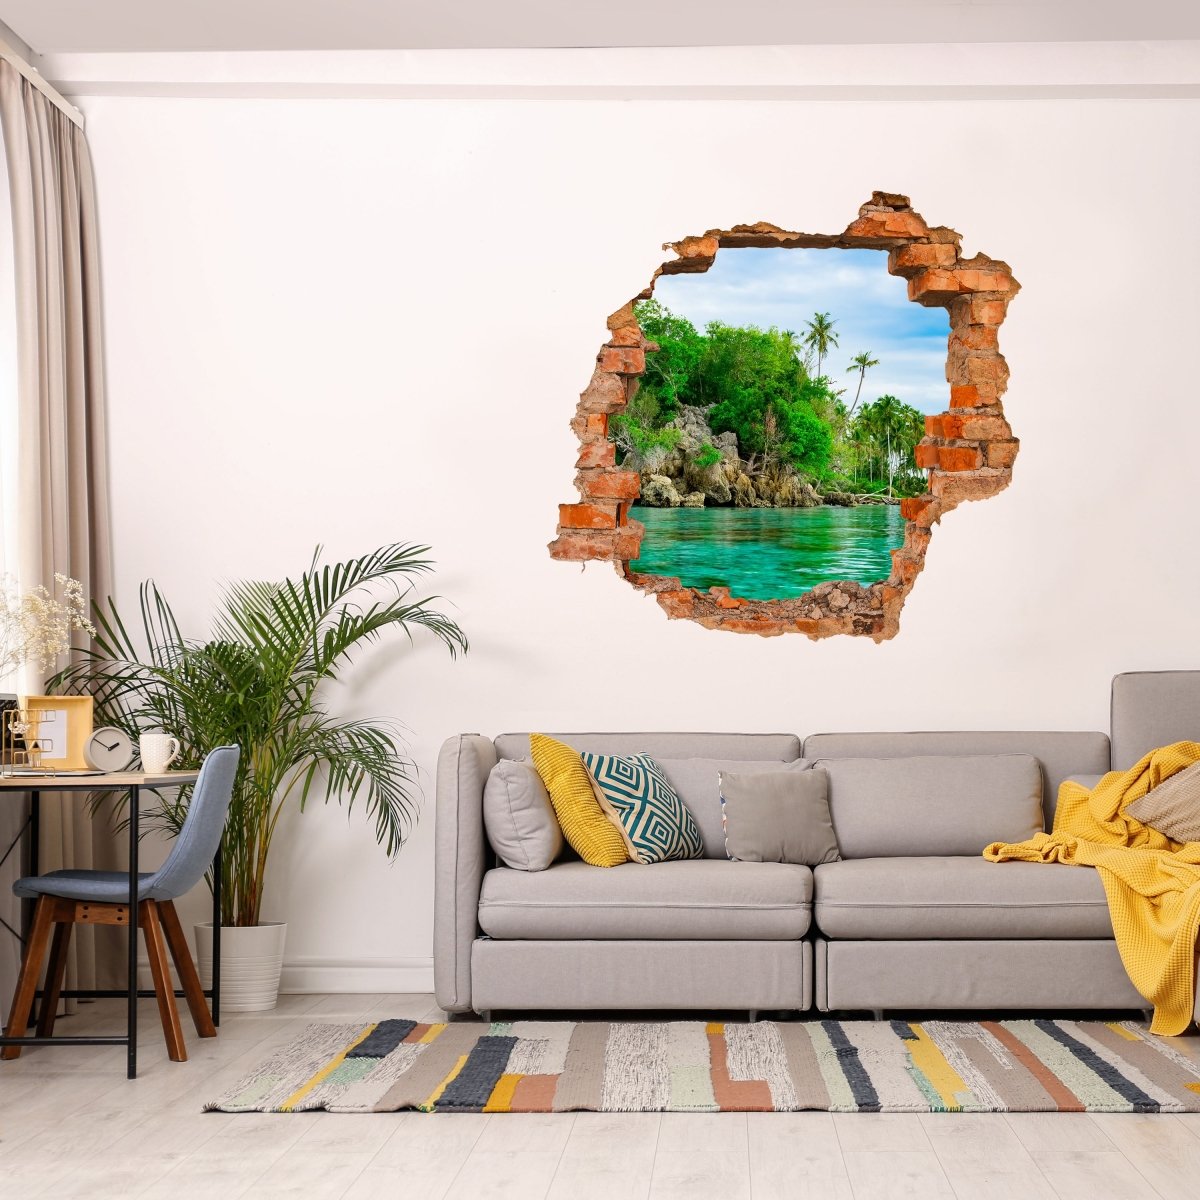 3D wall sticker lonely island, palm trees, rocks, sea - wall decal M1222